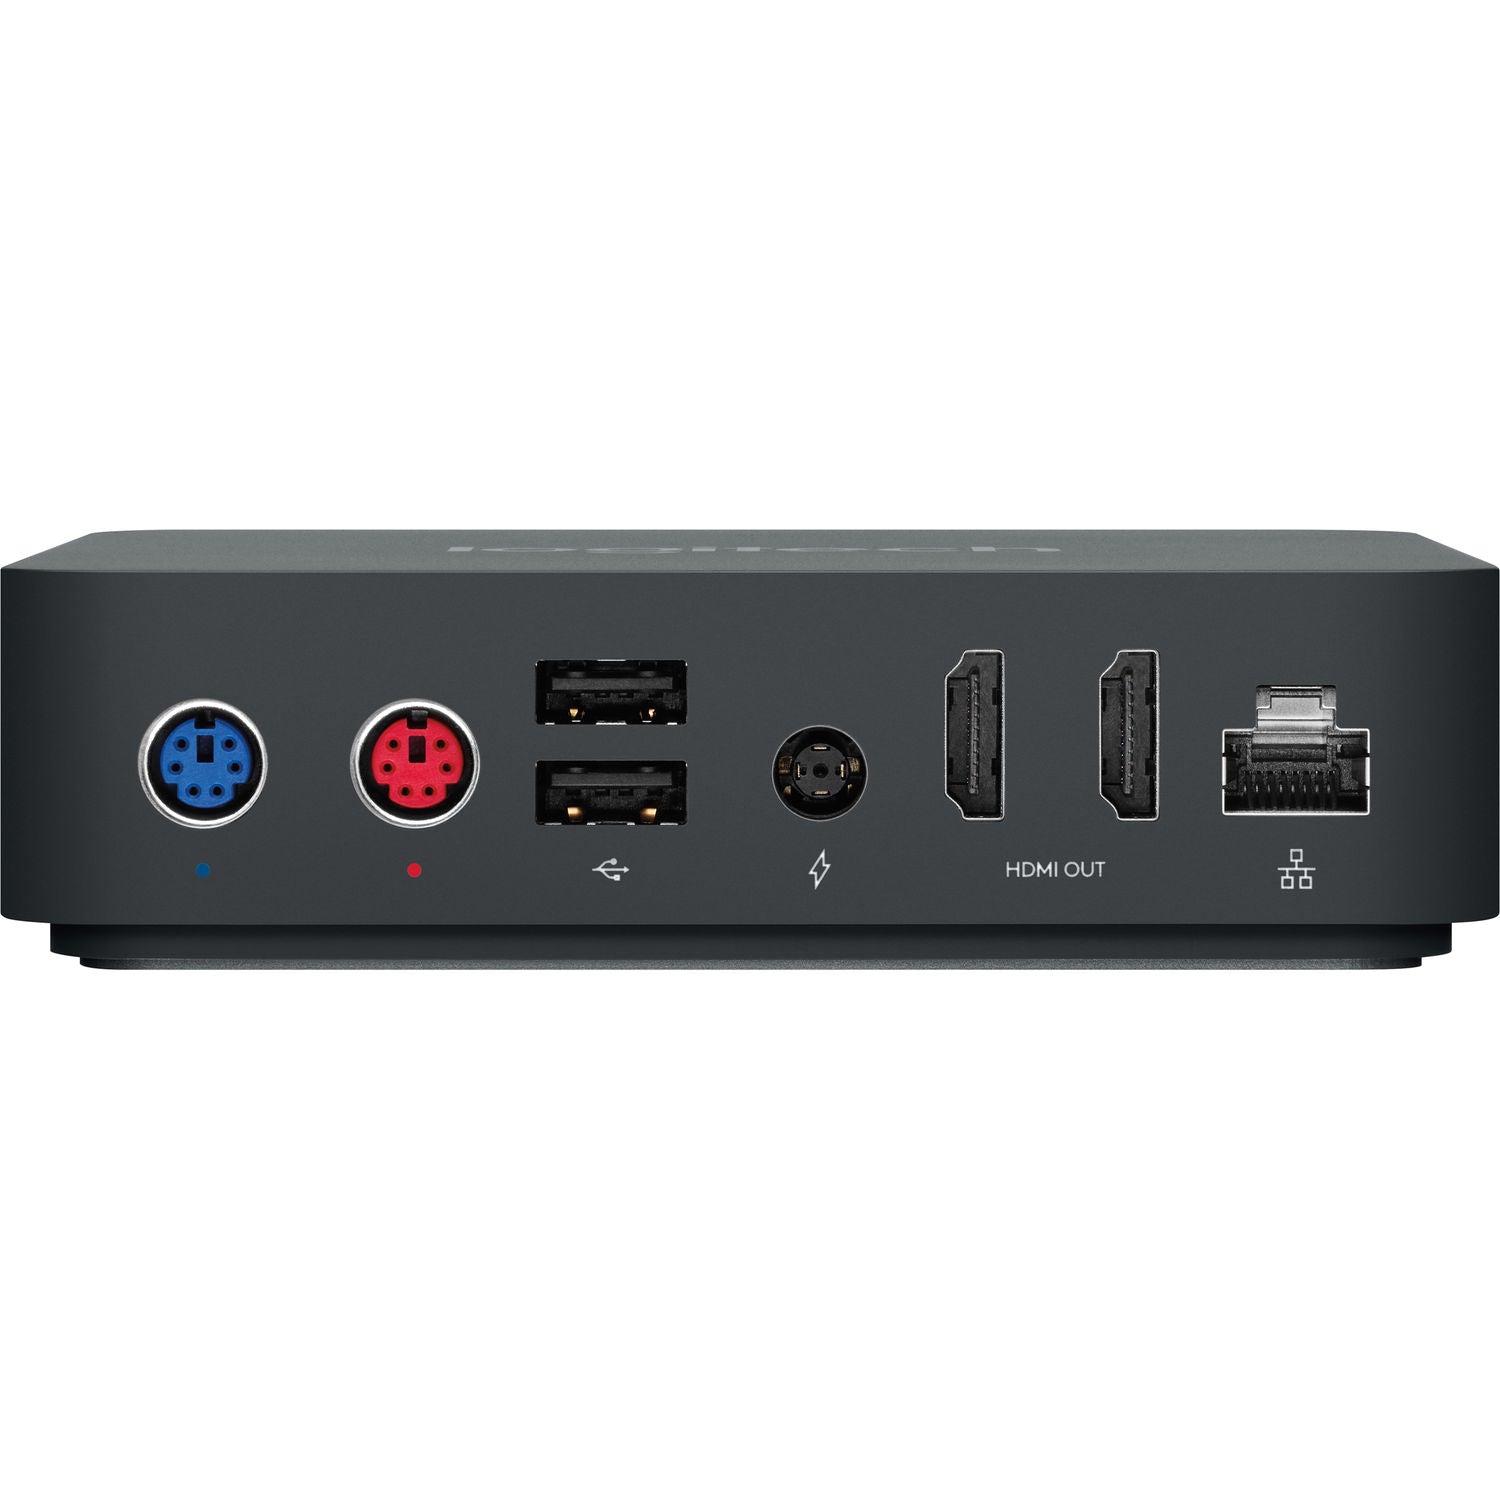 Logitec Smart Dock Extender Box with 5-in-1 Cable